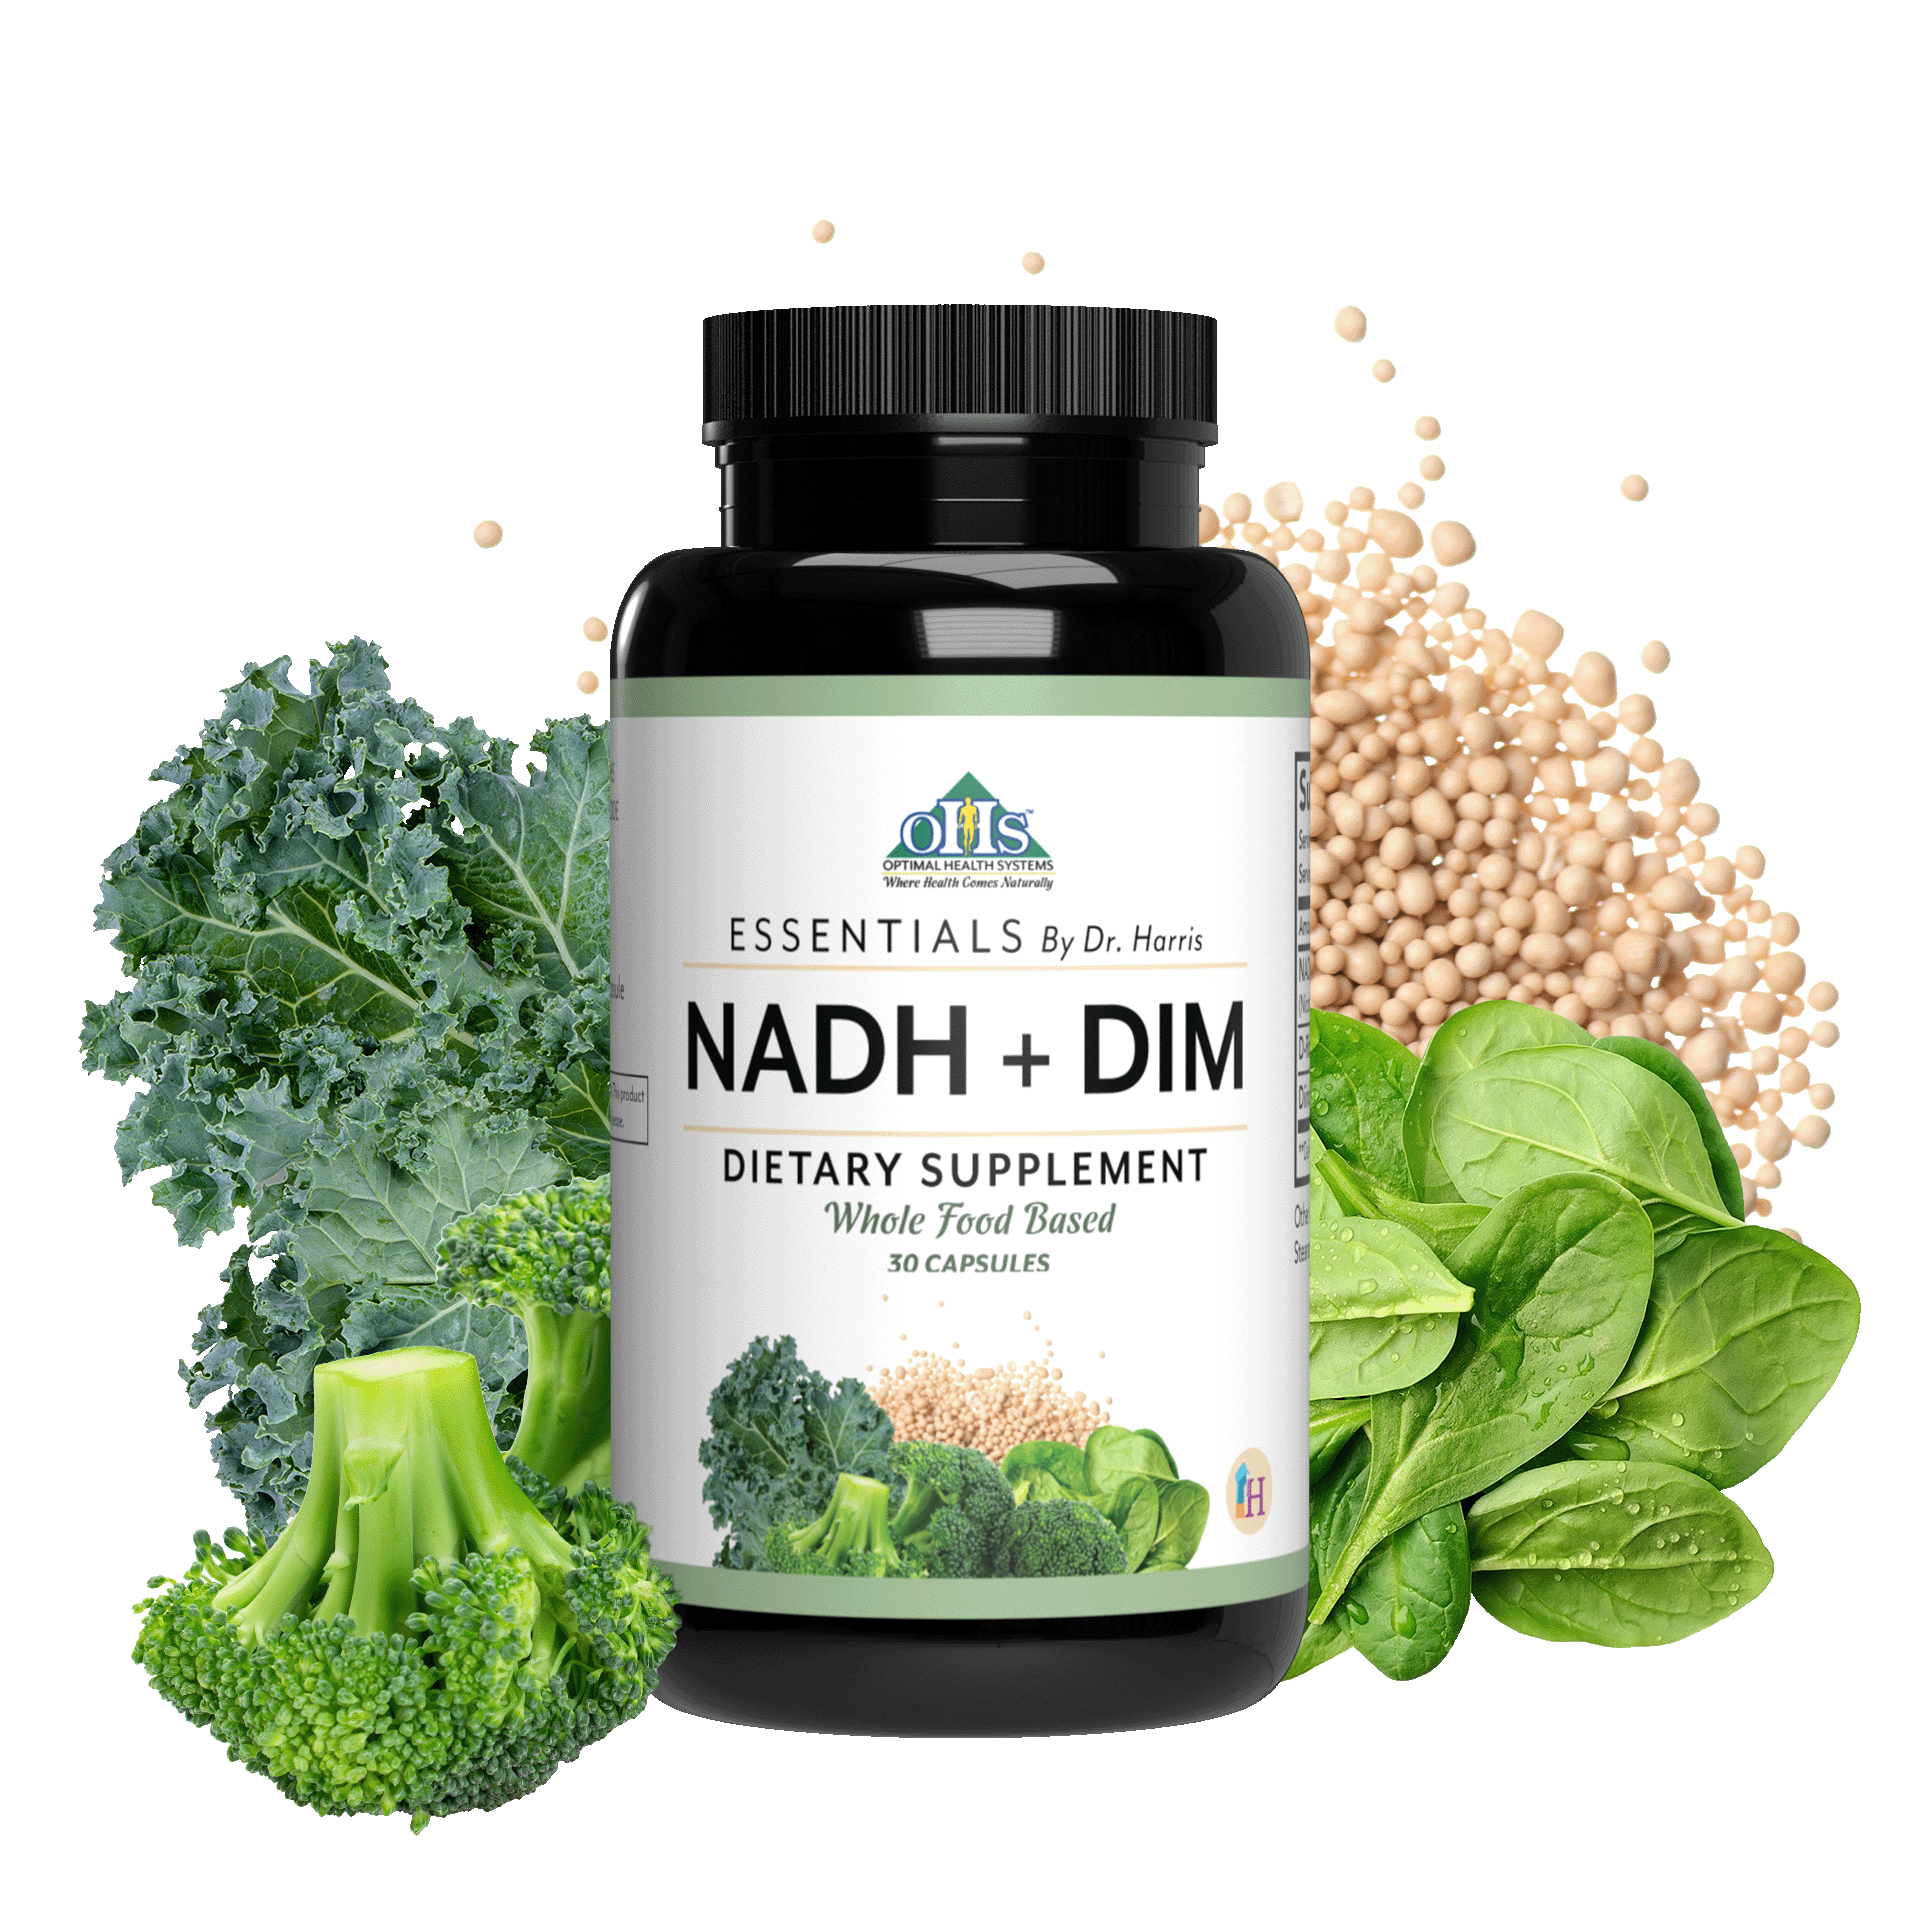 Image of a bottle of Essentials NADH+DIM. Around the bottle are spinach leaves, broccoli, Kale, and NADH.